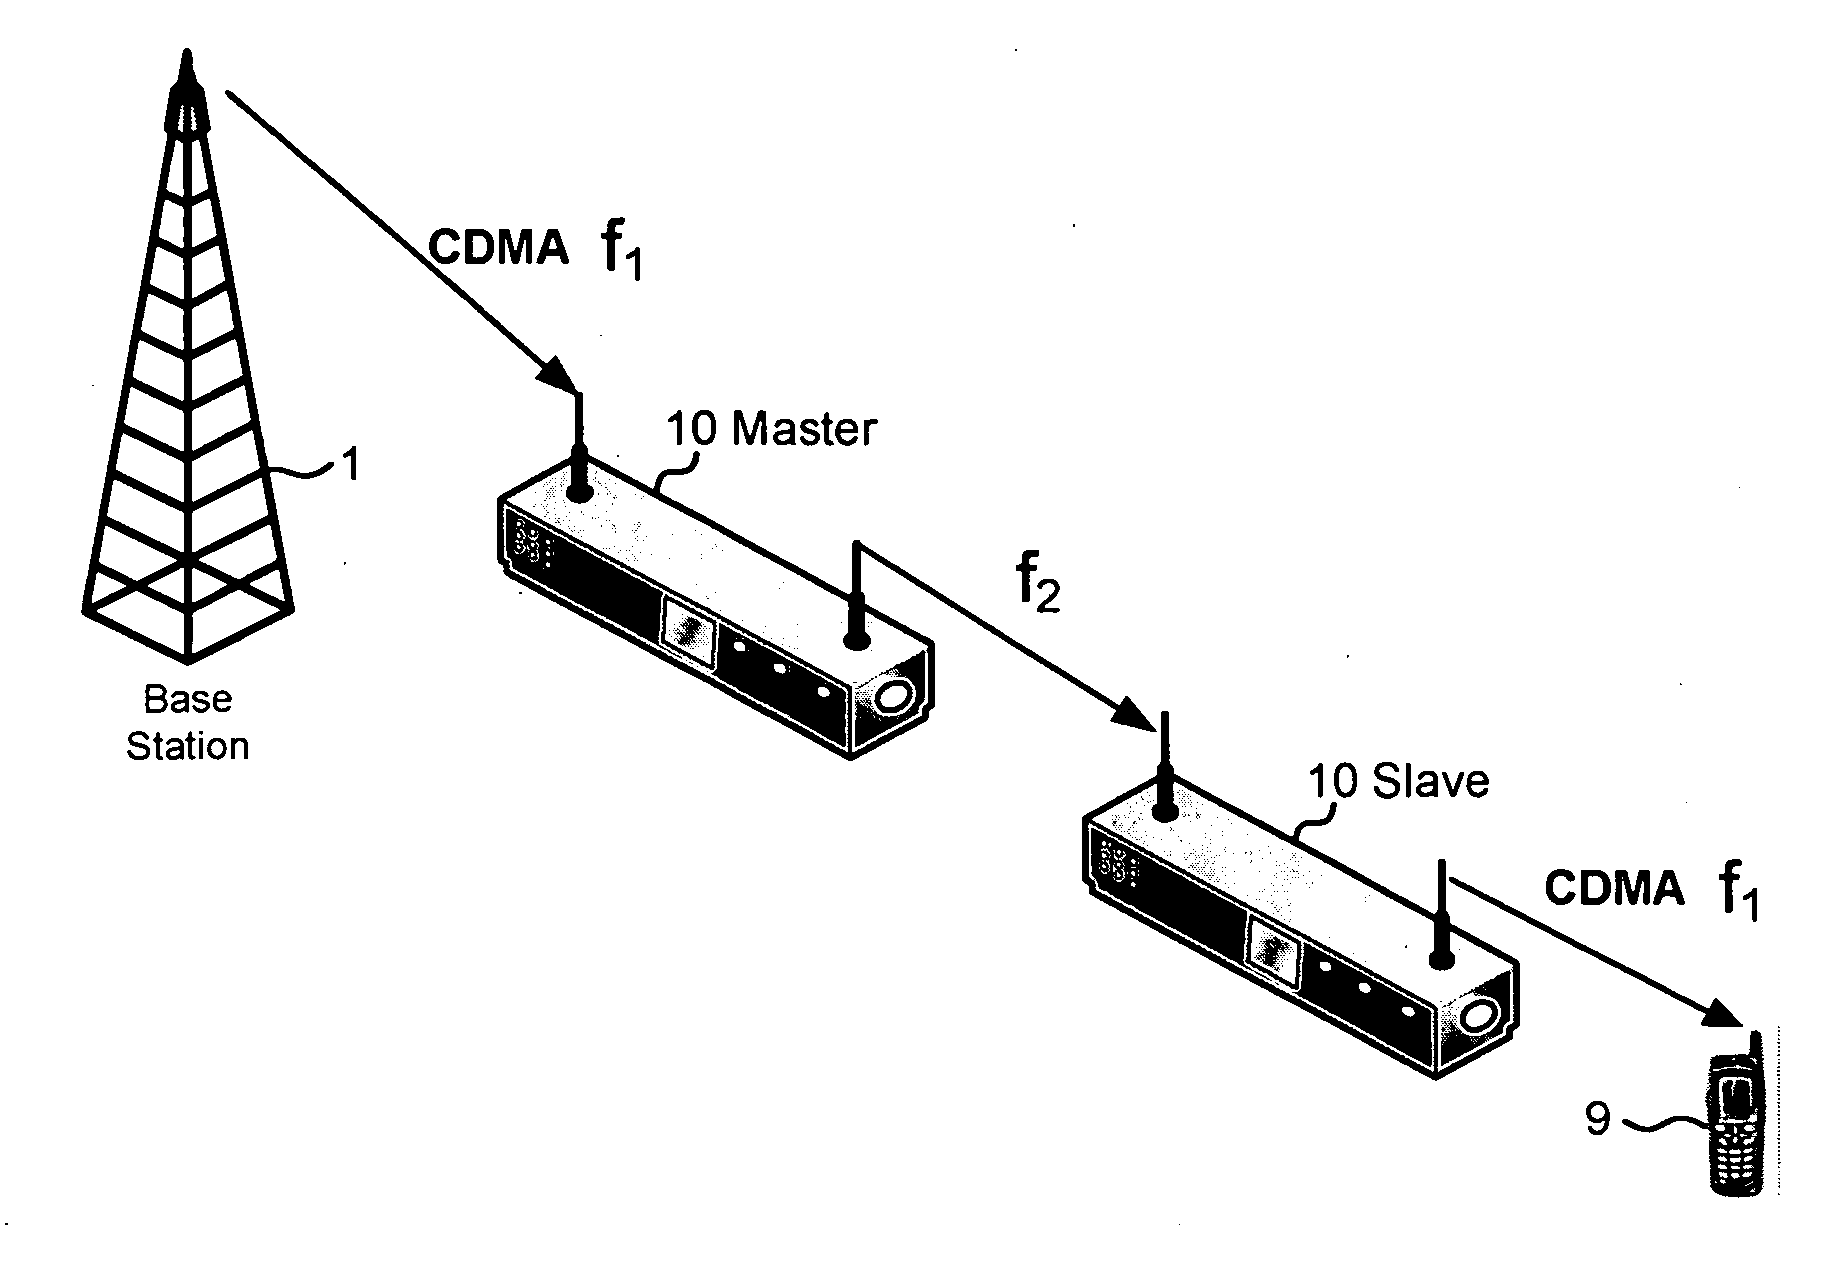 Explosion Proof Communications Relay and Communications System